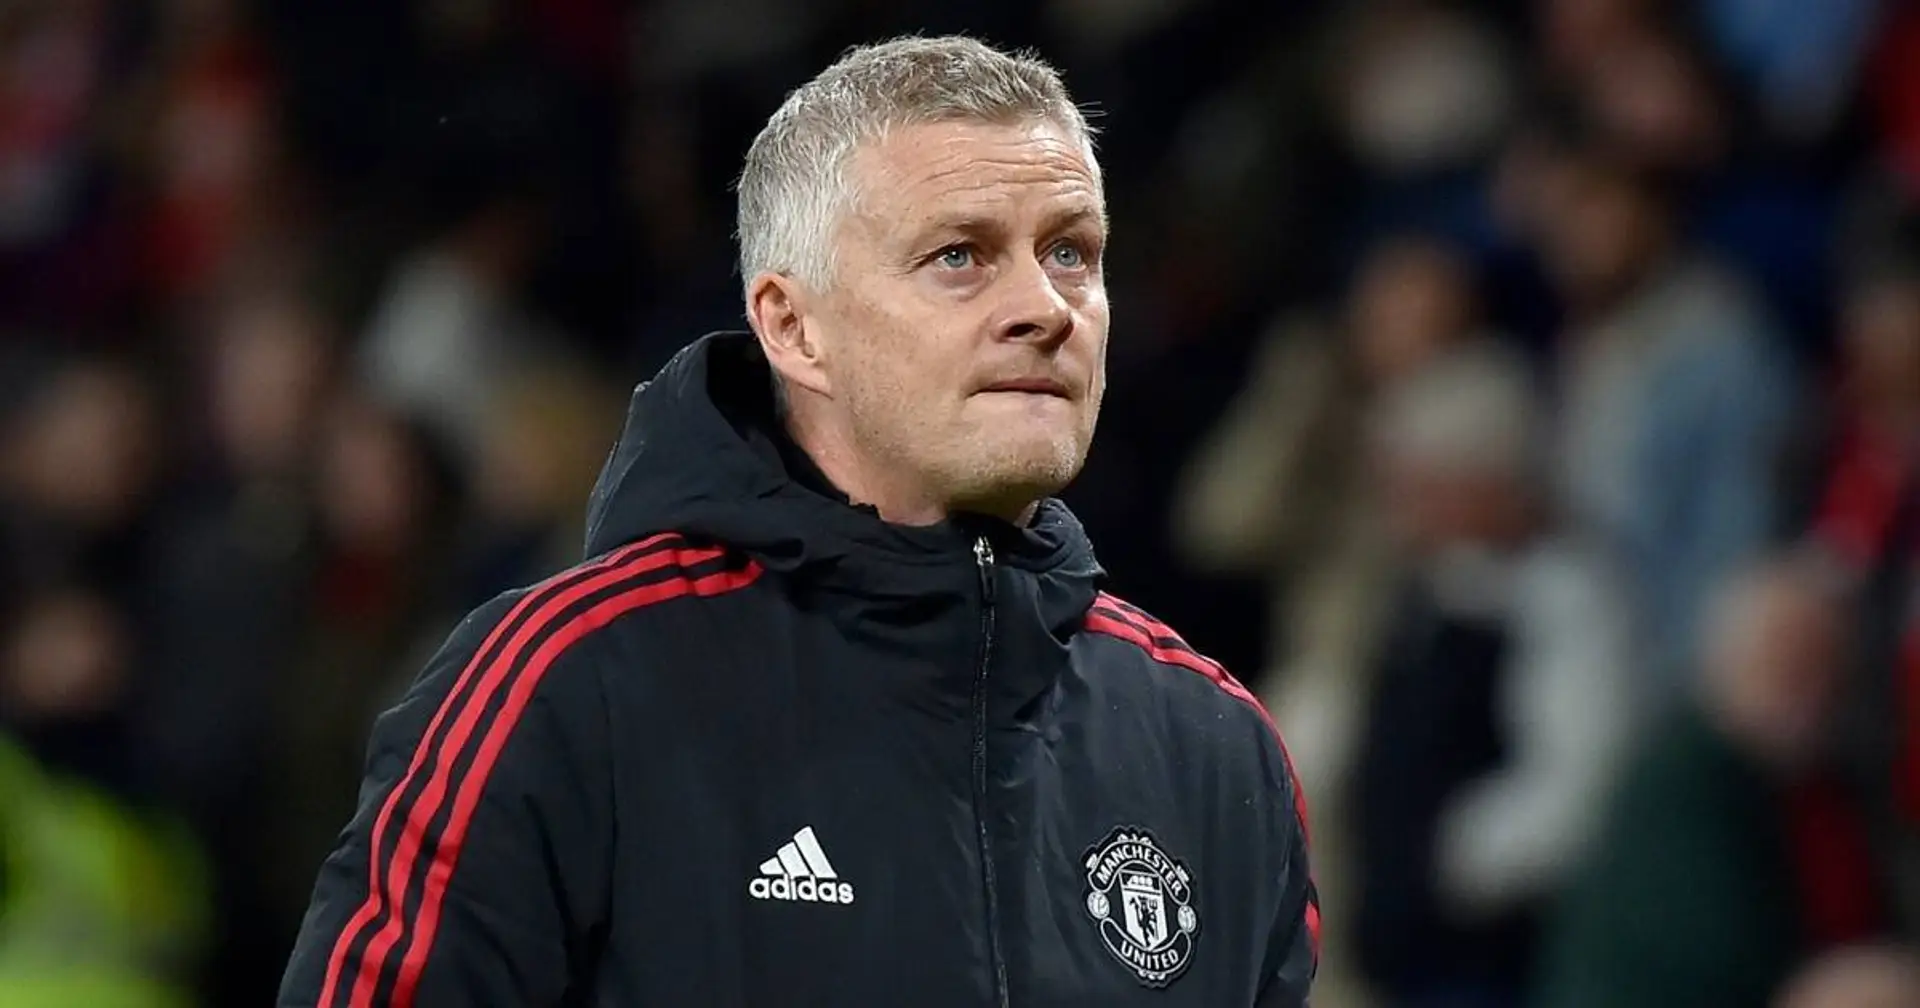 'Interim Ole was cracked for us': Man United fans react to Bayern's interest in Solskjaer